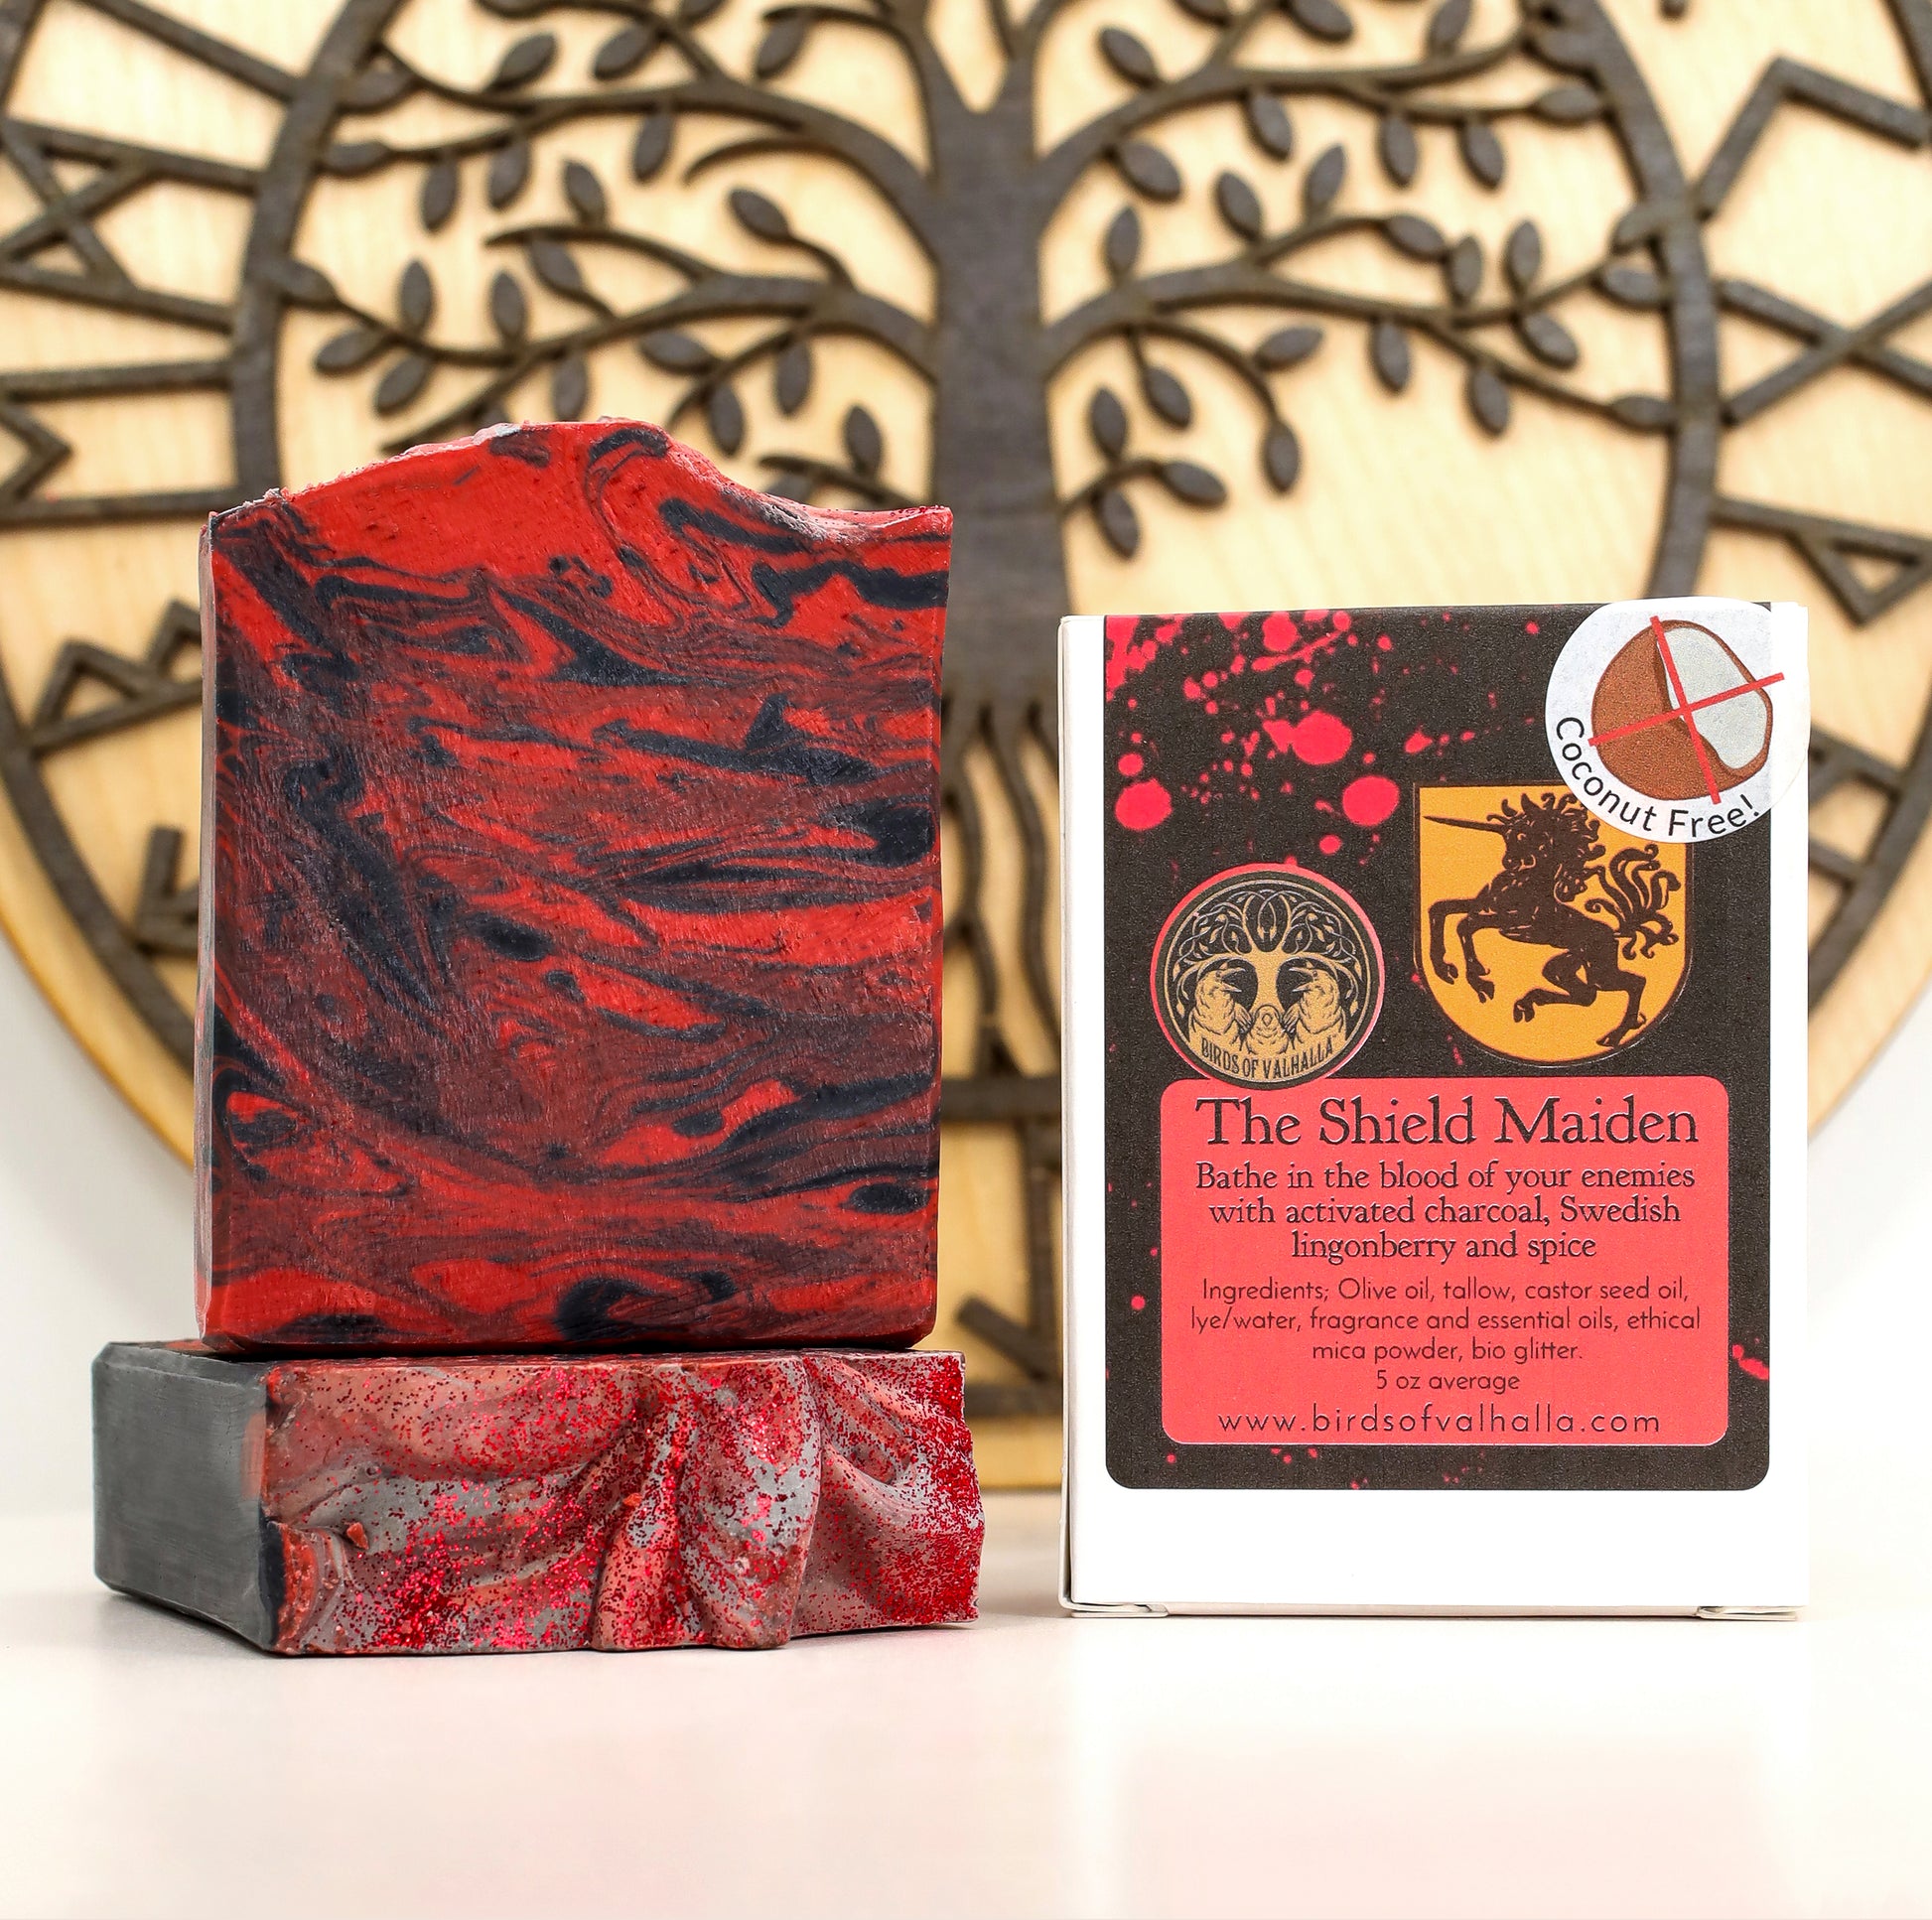 The Shield Maiden - Lingonberry and Spice Signature Soap - Coconut Free, Birds of Valhalla, Signature Soap, Birds of Valhalla